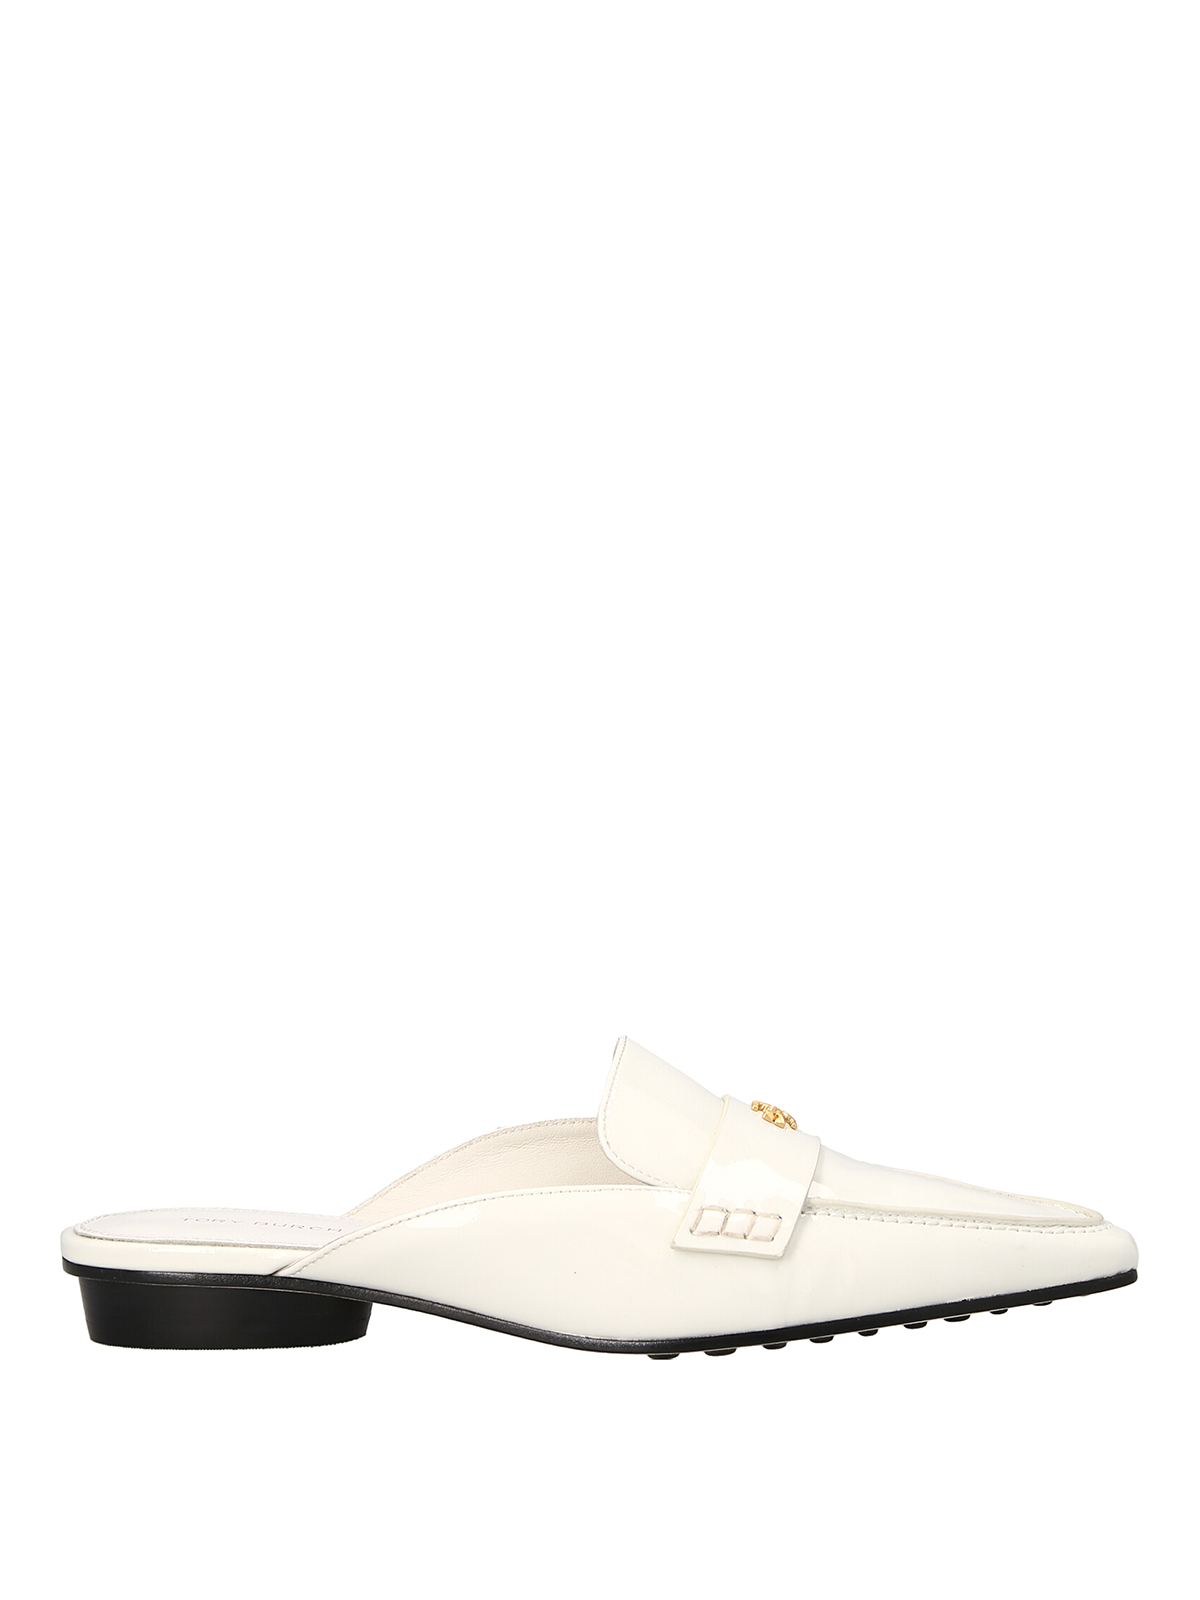 Mules shoes Tory Burch - Delicacy mules - 146629100 | Shop online at iKRIX